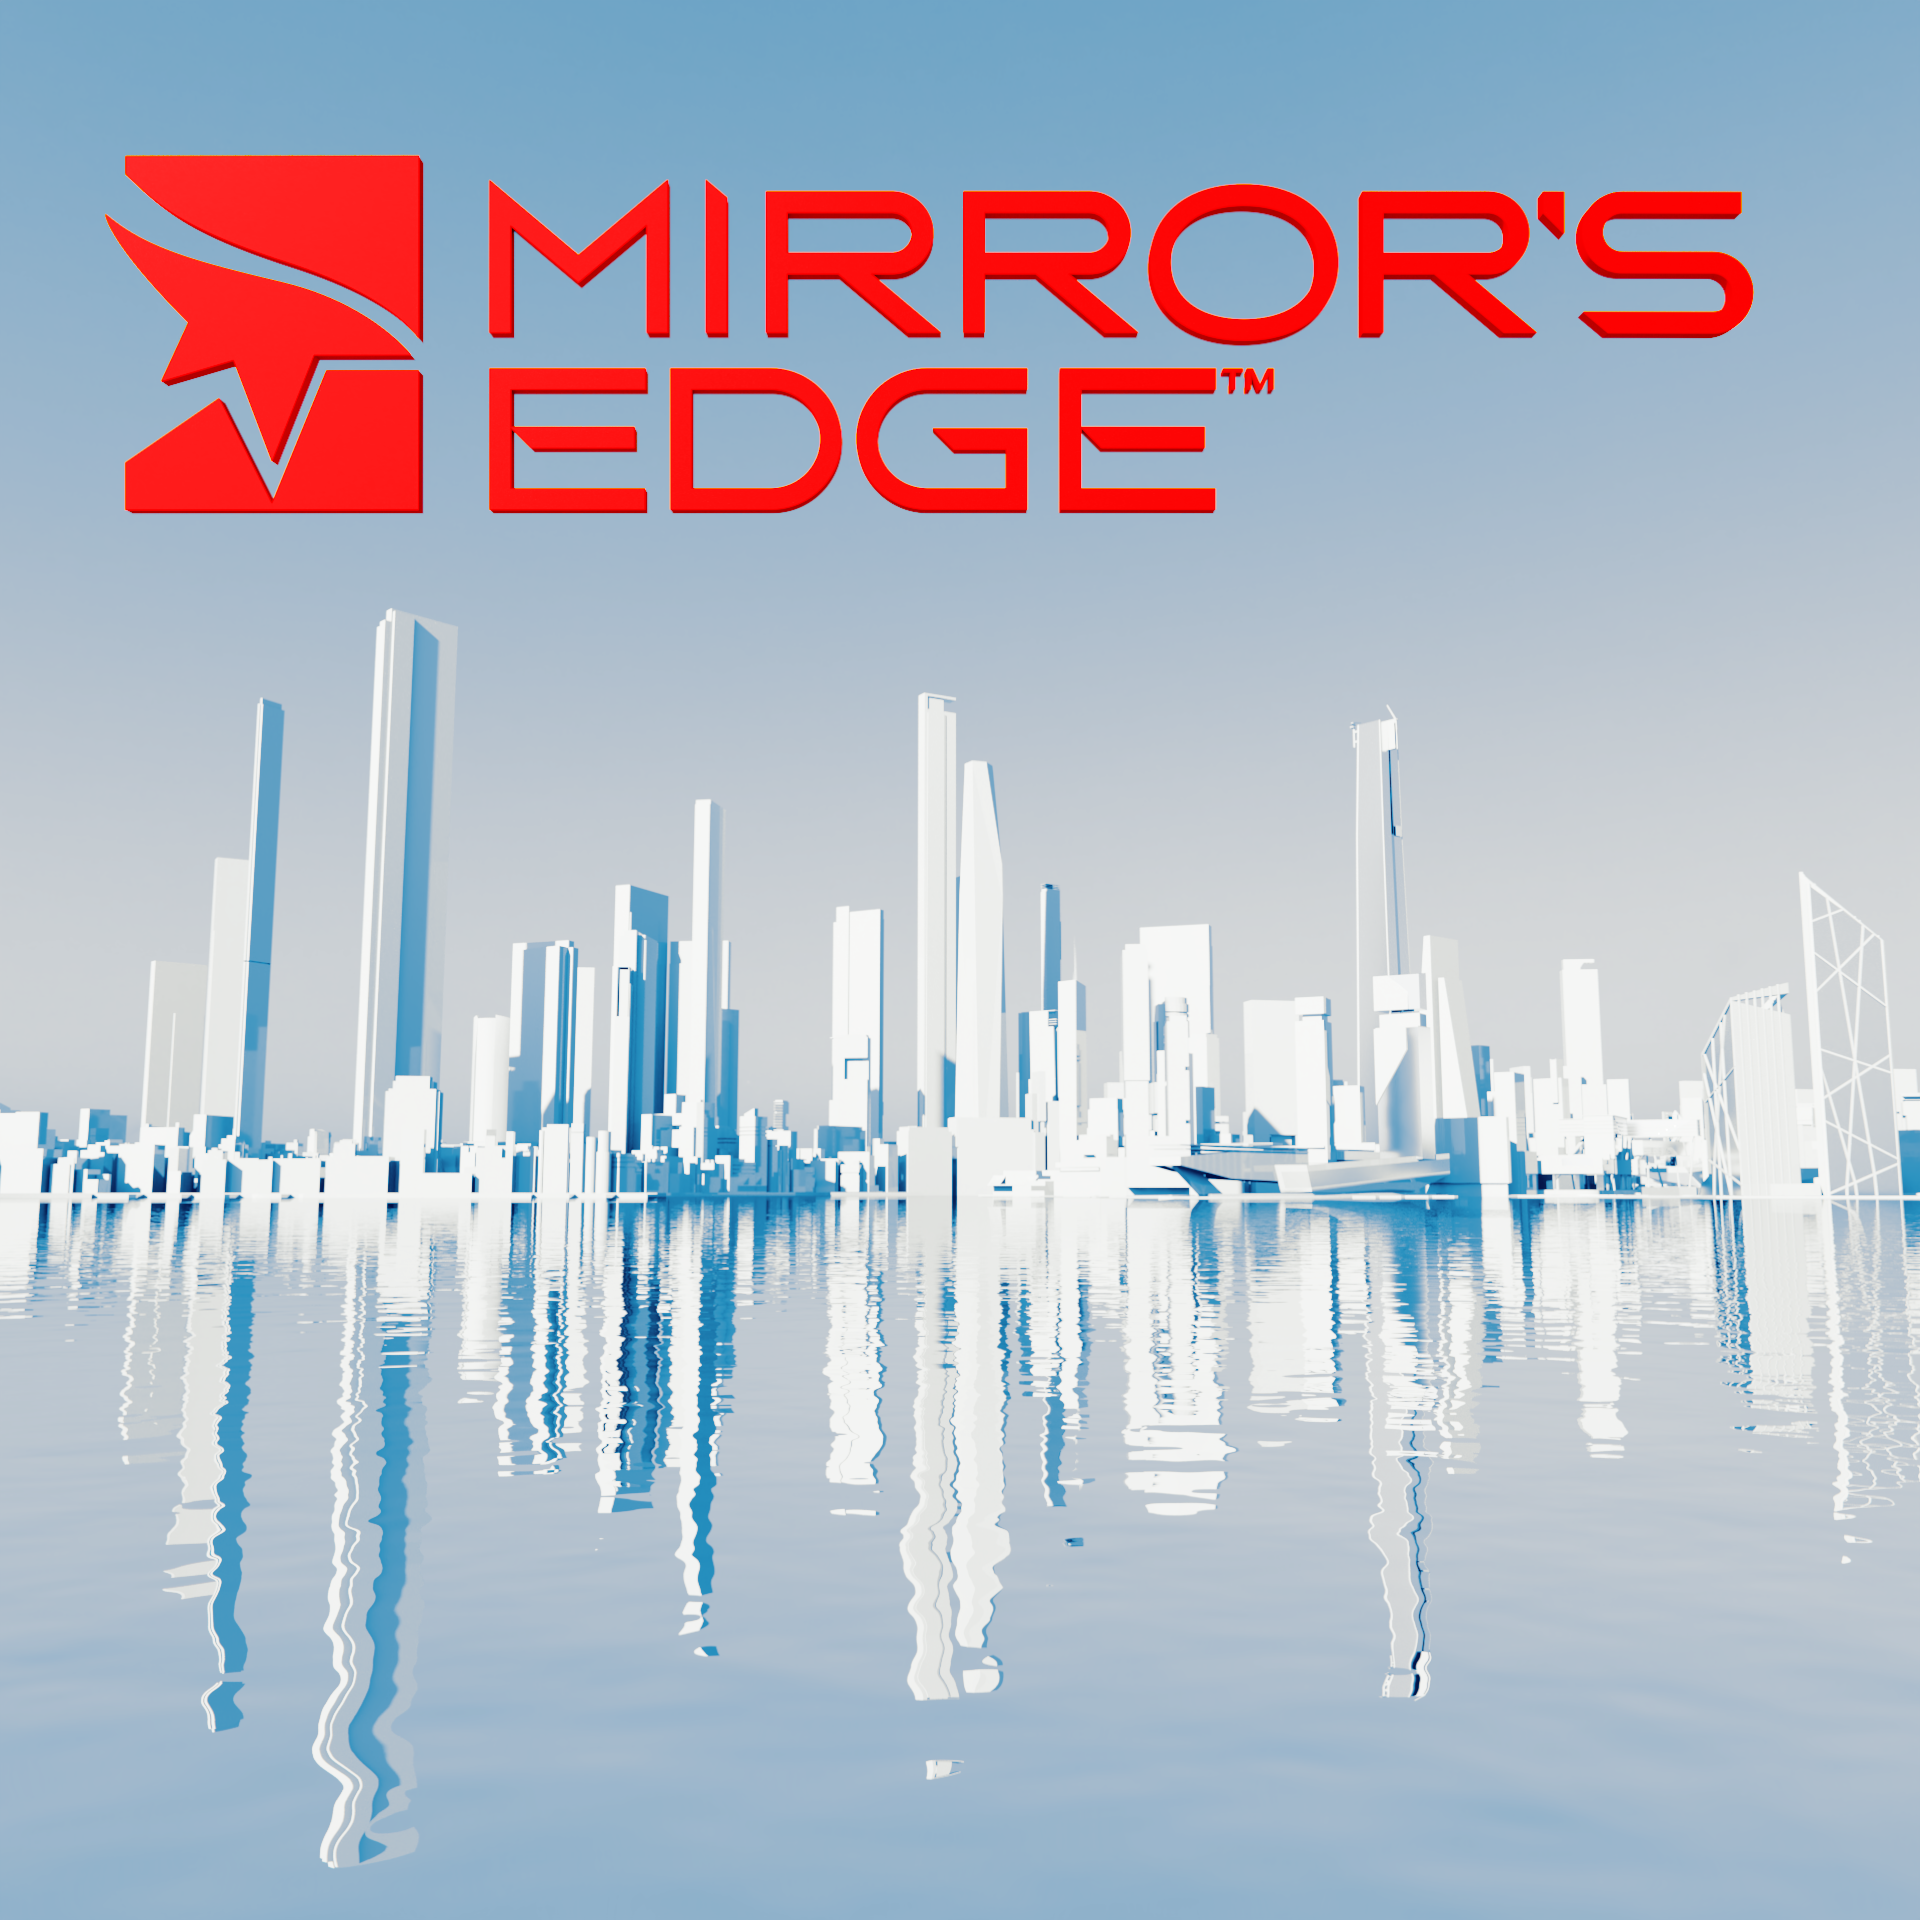 My own render of the Mirror's Edge: Catalyst world in the style of Mirror's Edge's menu screen.